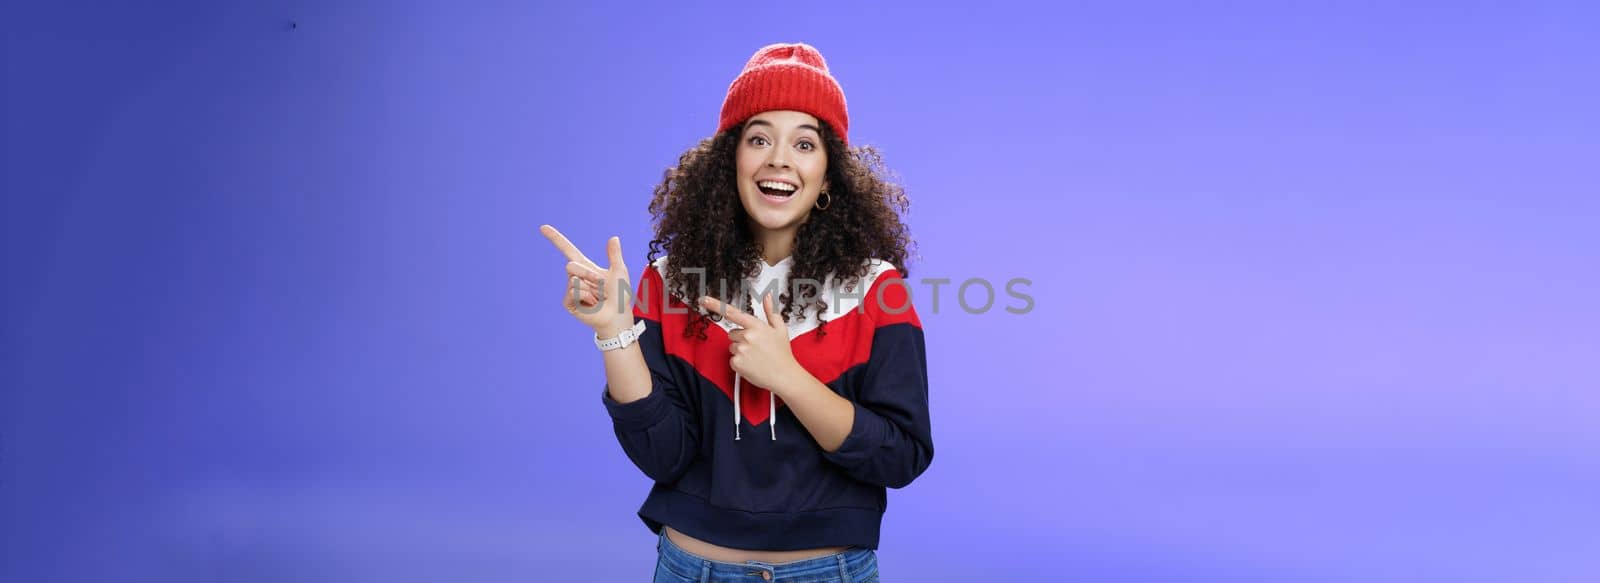 Lifestyle. Enthusiastic friendly-looking attractive young 20s woman with curly hair in warm beanie and sweatshirt smiling open mouth amazed and delighted as pointing at upper right corner over blue background.